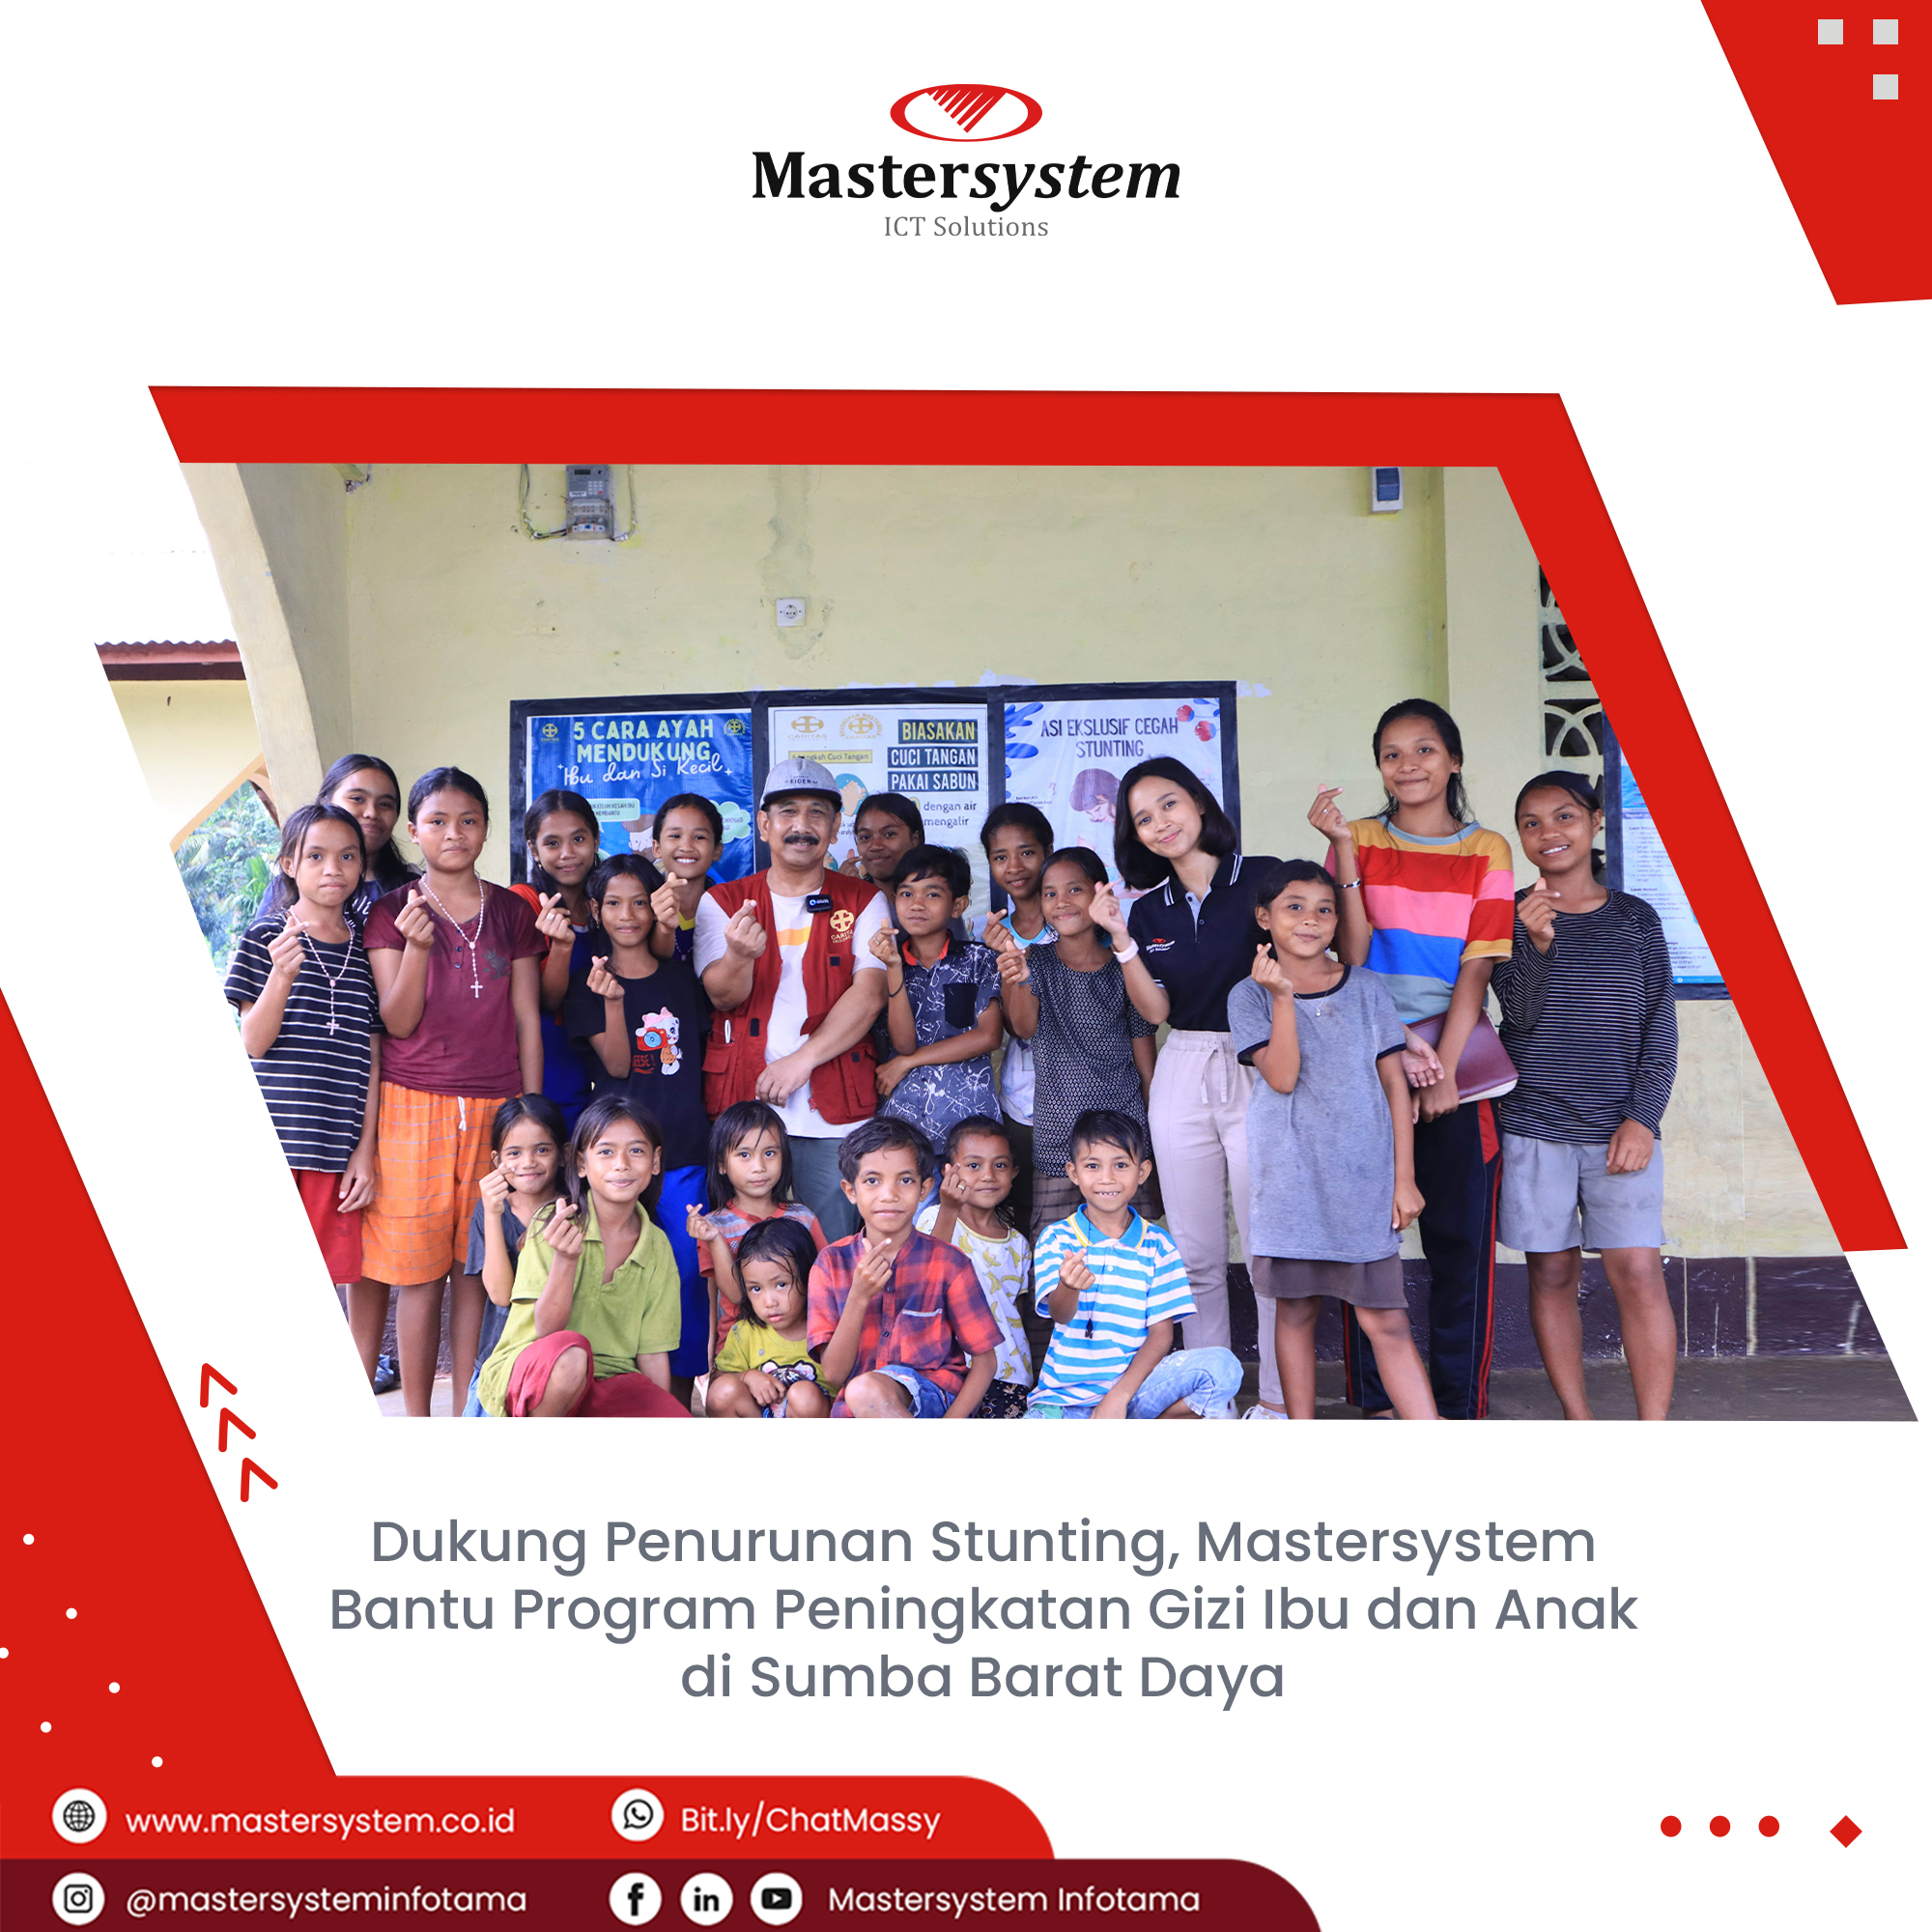 Supporting Stunting Reduction, Mastersystem Contributes to Maternal and Child Nutrition Improvement Program in Southwest Sumba